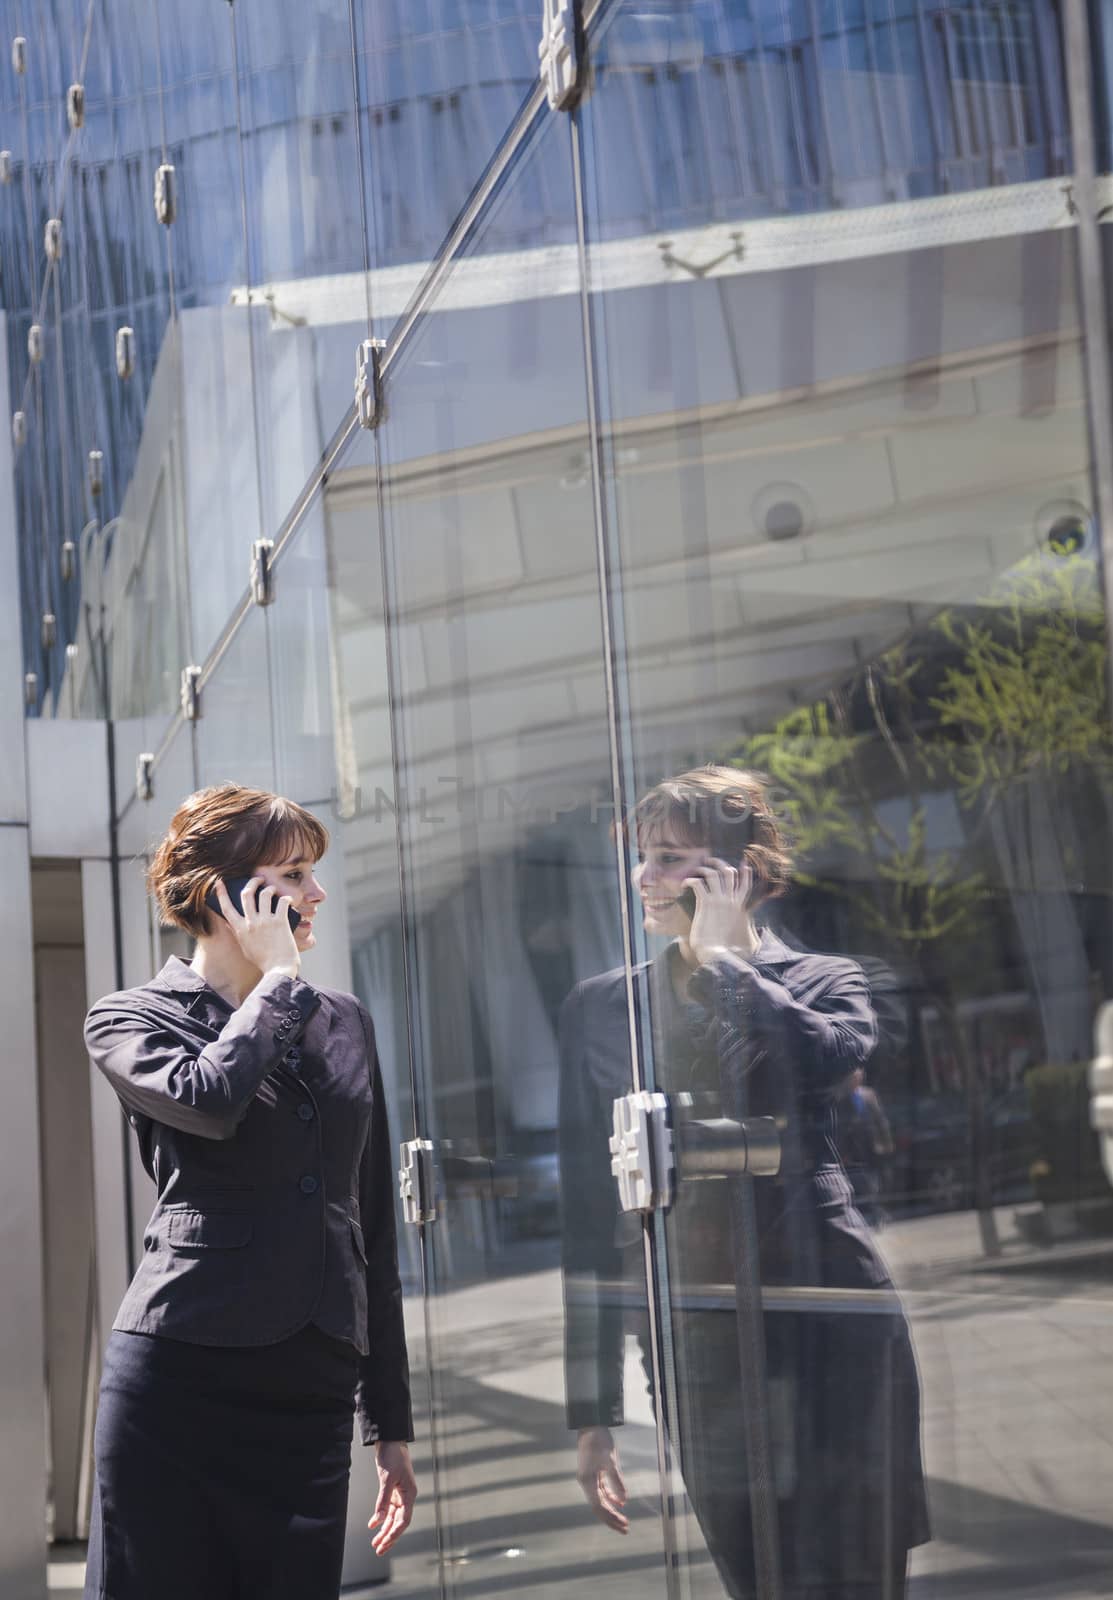 Smiling businesswoman on the phone outside in Beijing looking at her reflection in the glass of the building